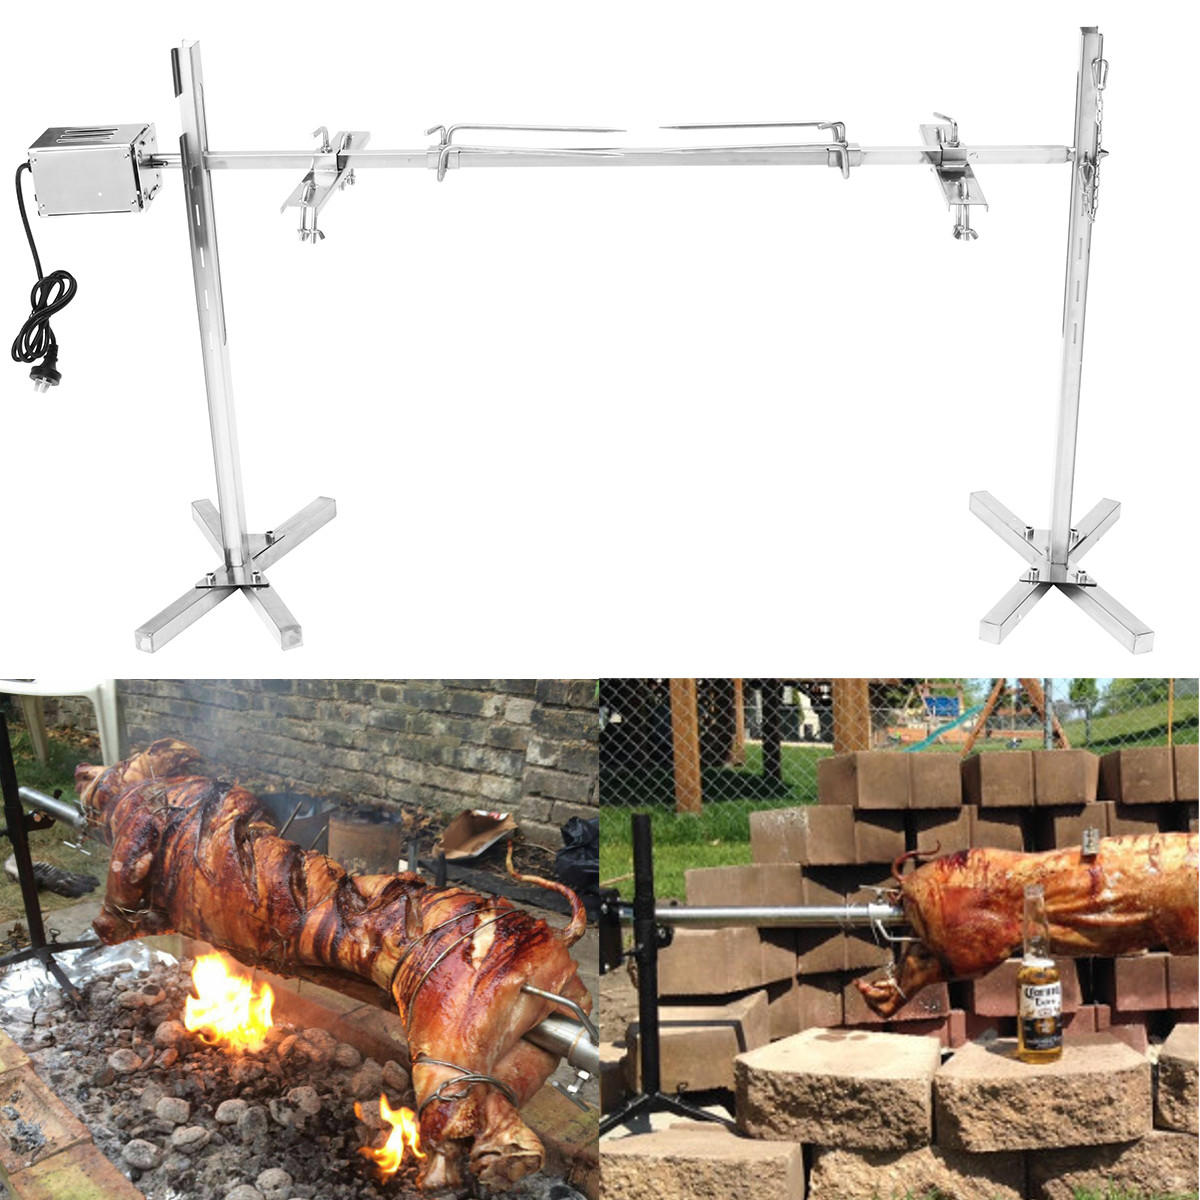 Large Grill Rotisserie Spit Roaster Rod Charcoal BBQ Pig Chicken 15W Motor Kit 